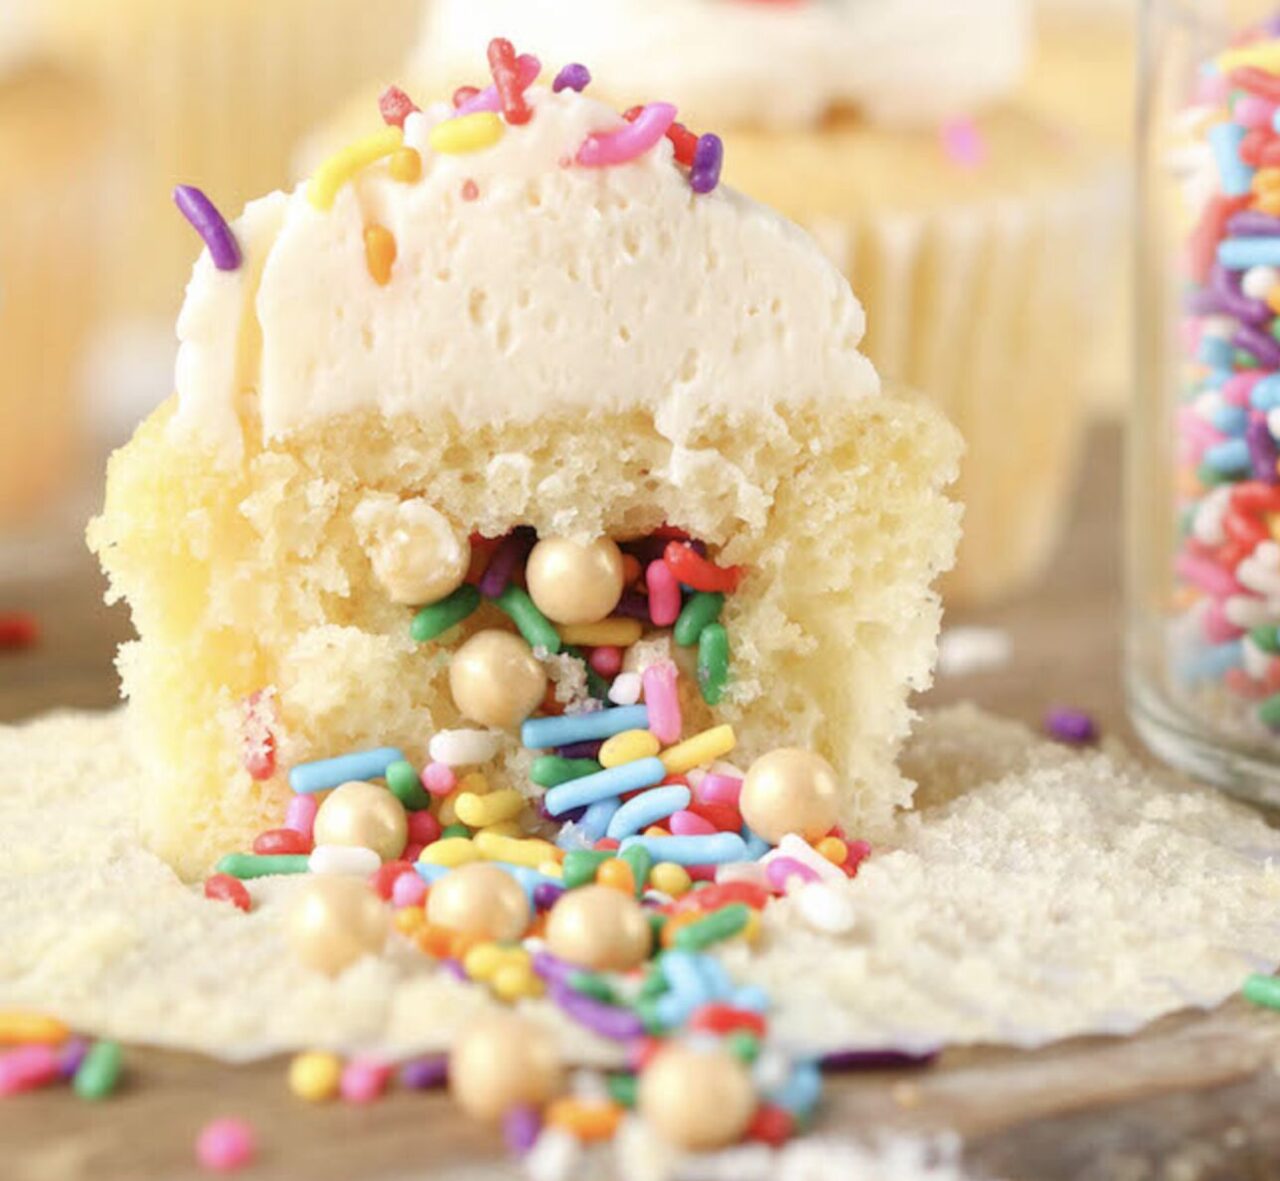 Shushan Hovsepyan: Have you heard about the Vanilla-Sprinkle concept?